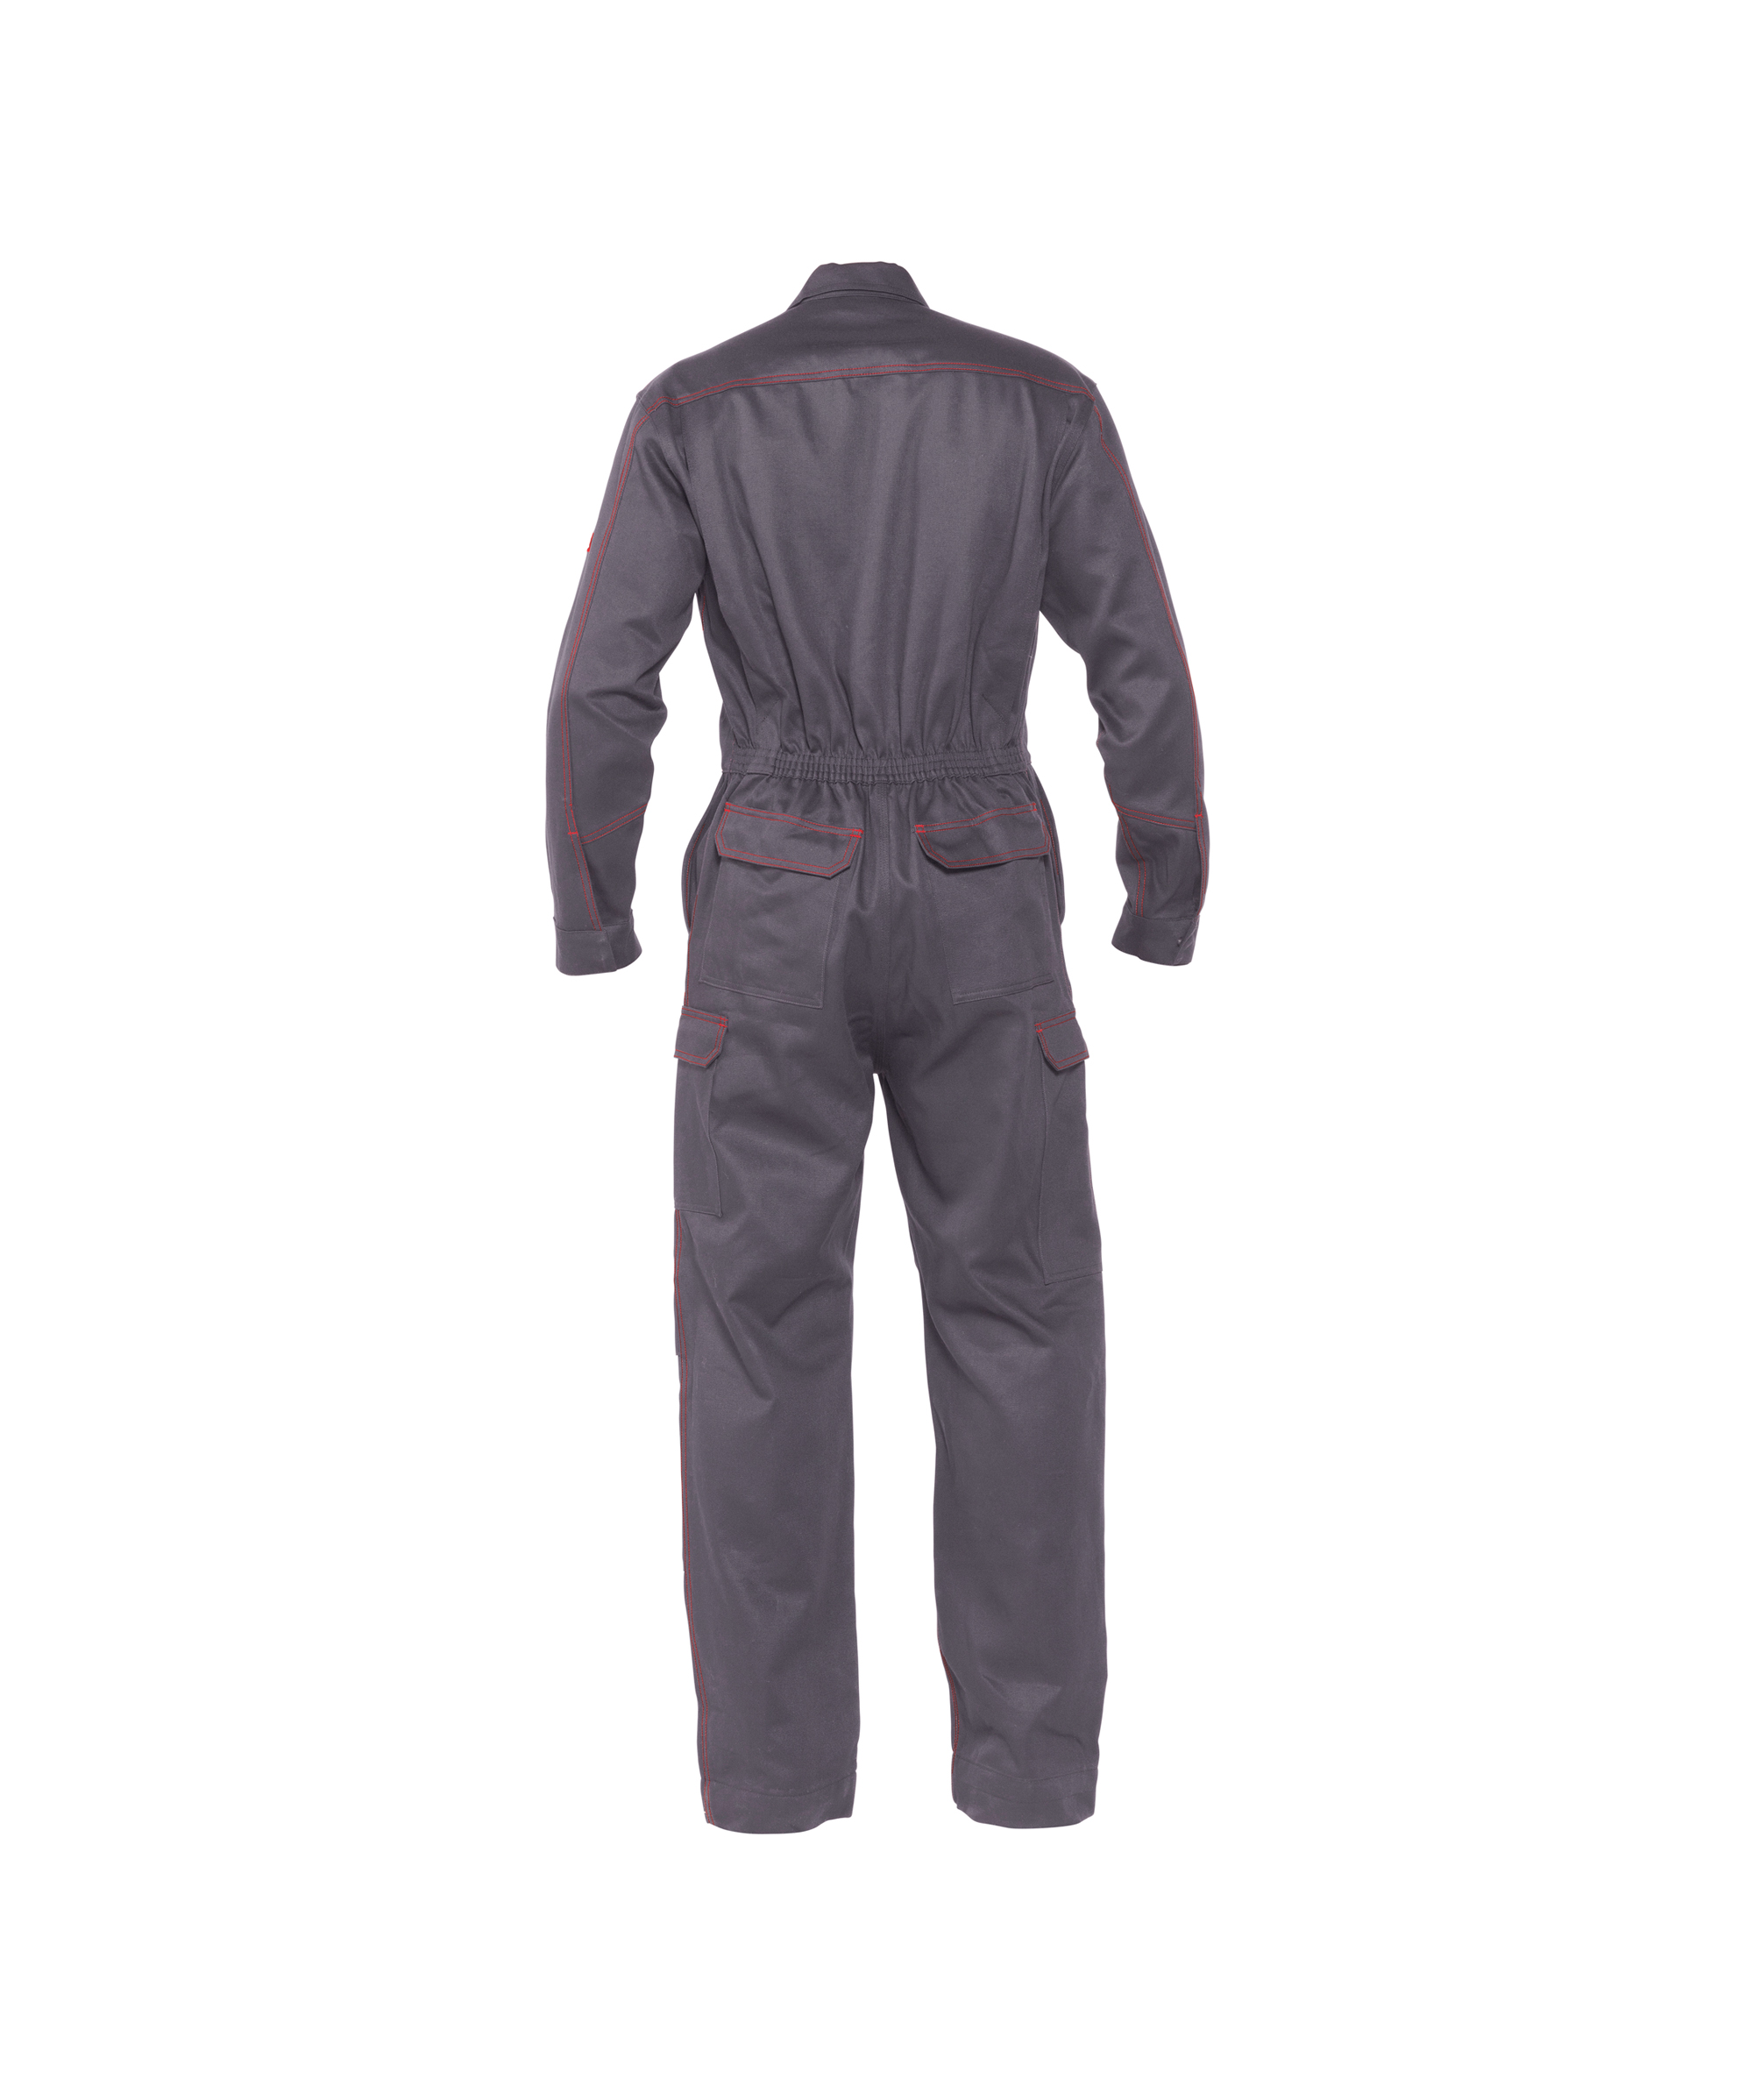 toronto_flame-retardant-overall-with-knee-pockets_cement-grey_back.jpg